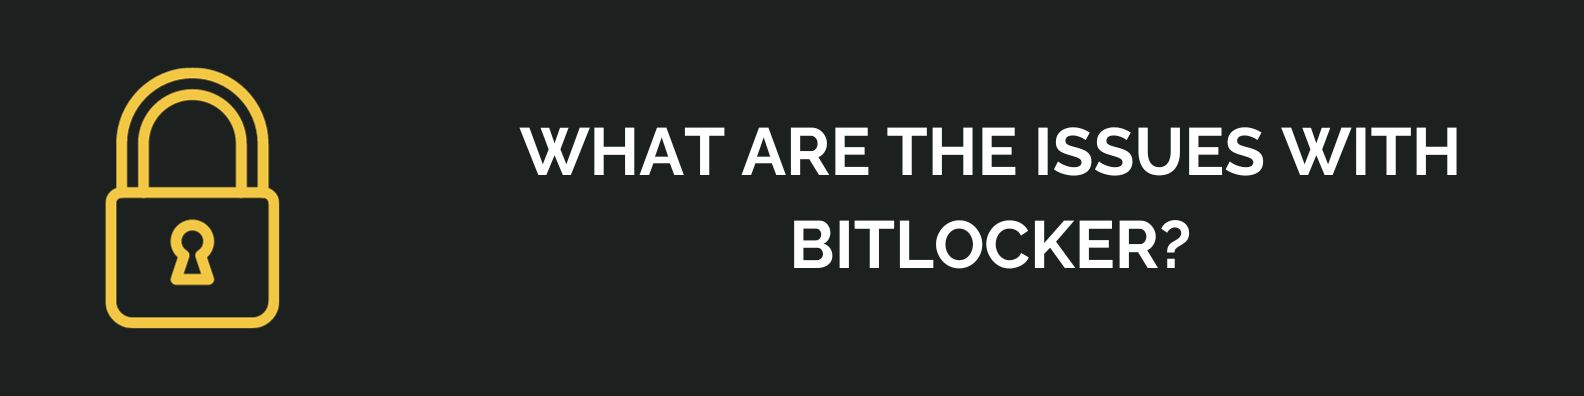 What are the issues with Bitlocker